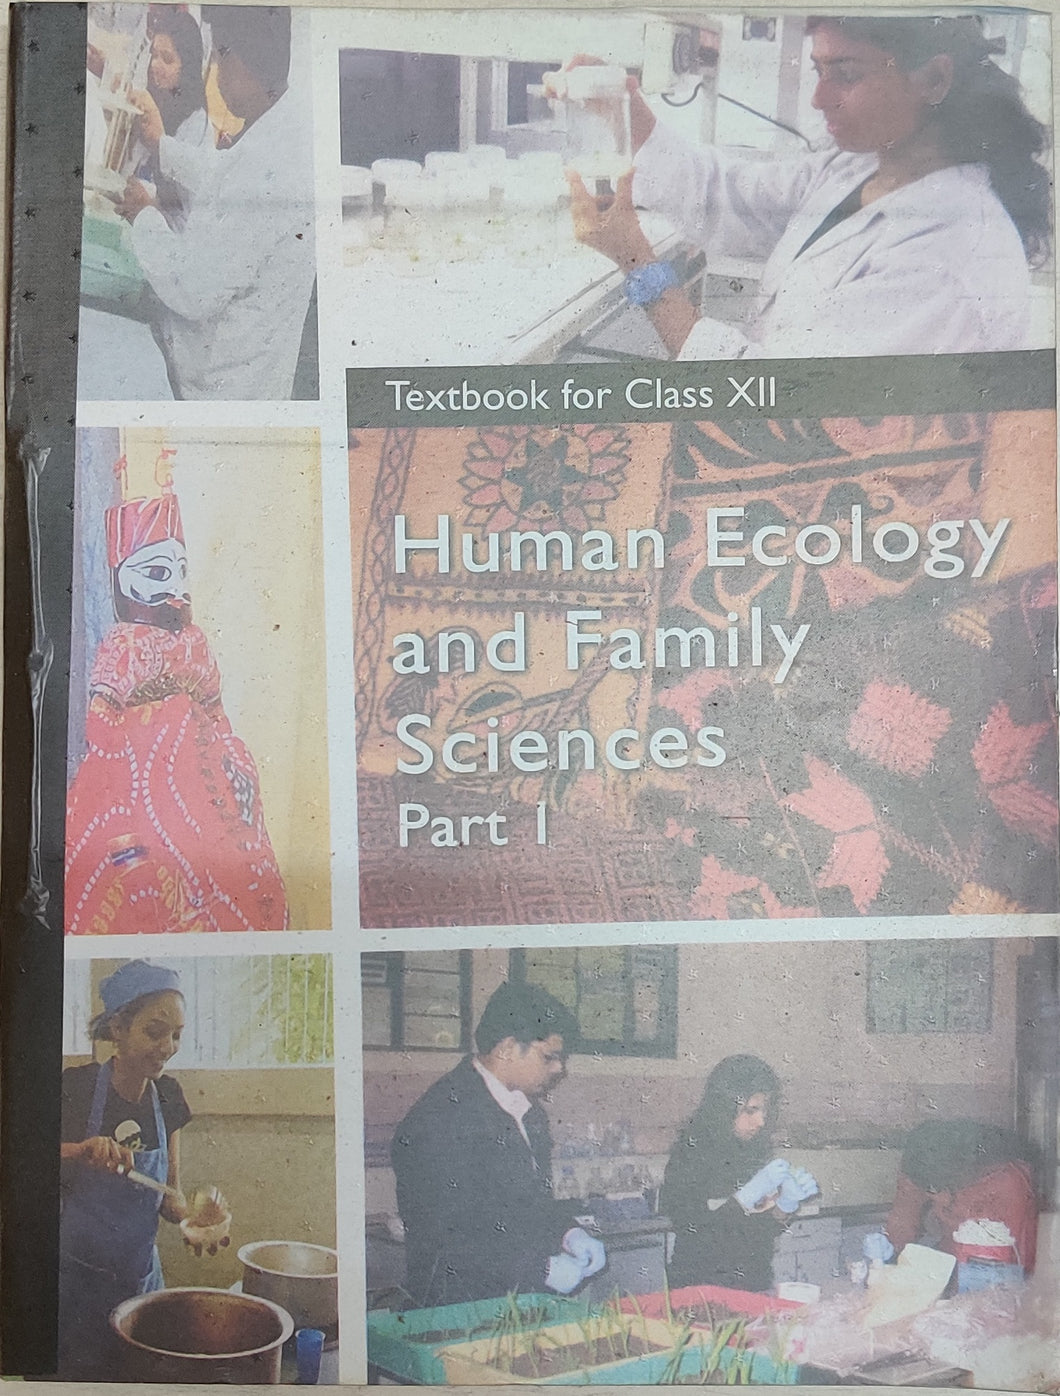 NCERT Human Ecology & Family Science Part I for Class 12 - latest edition as per NCERT/CBSE